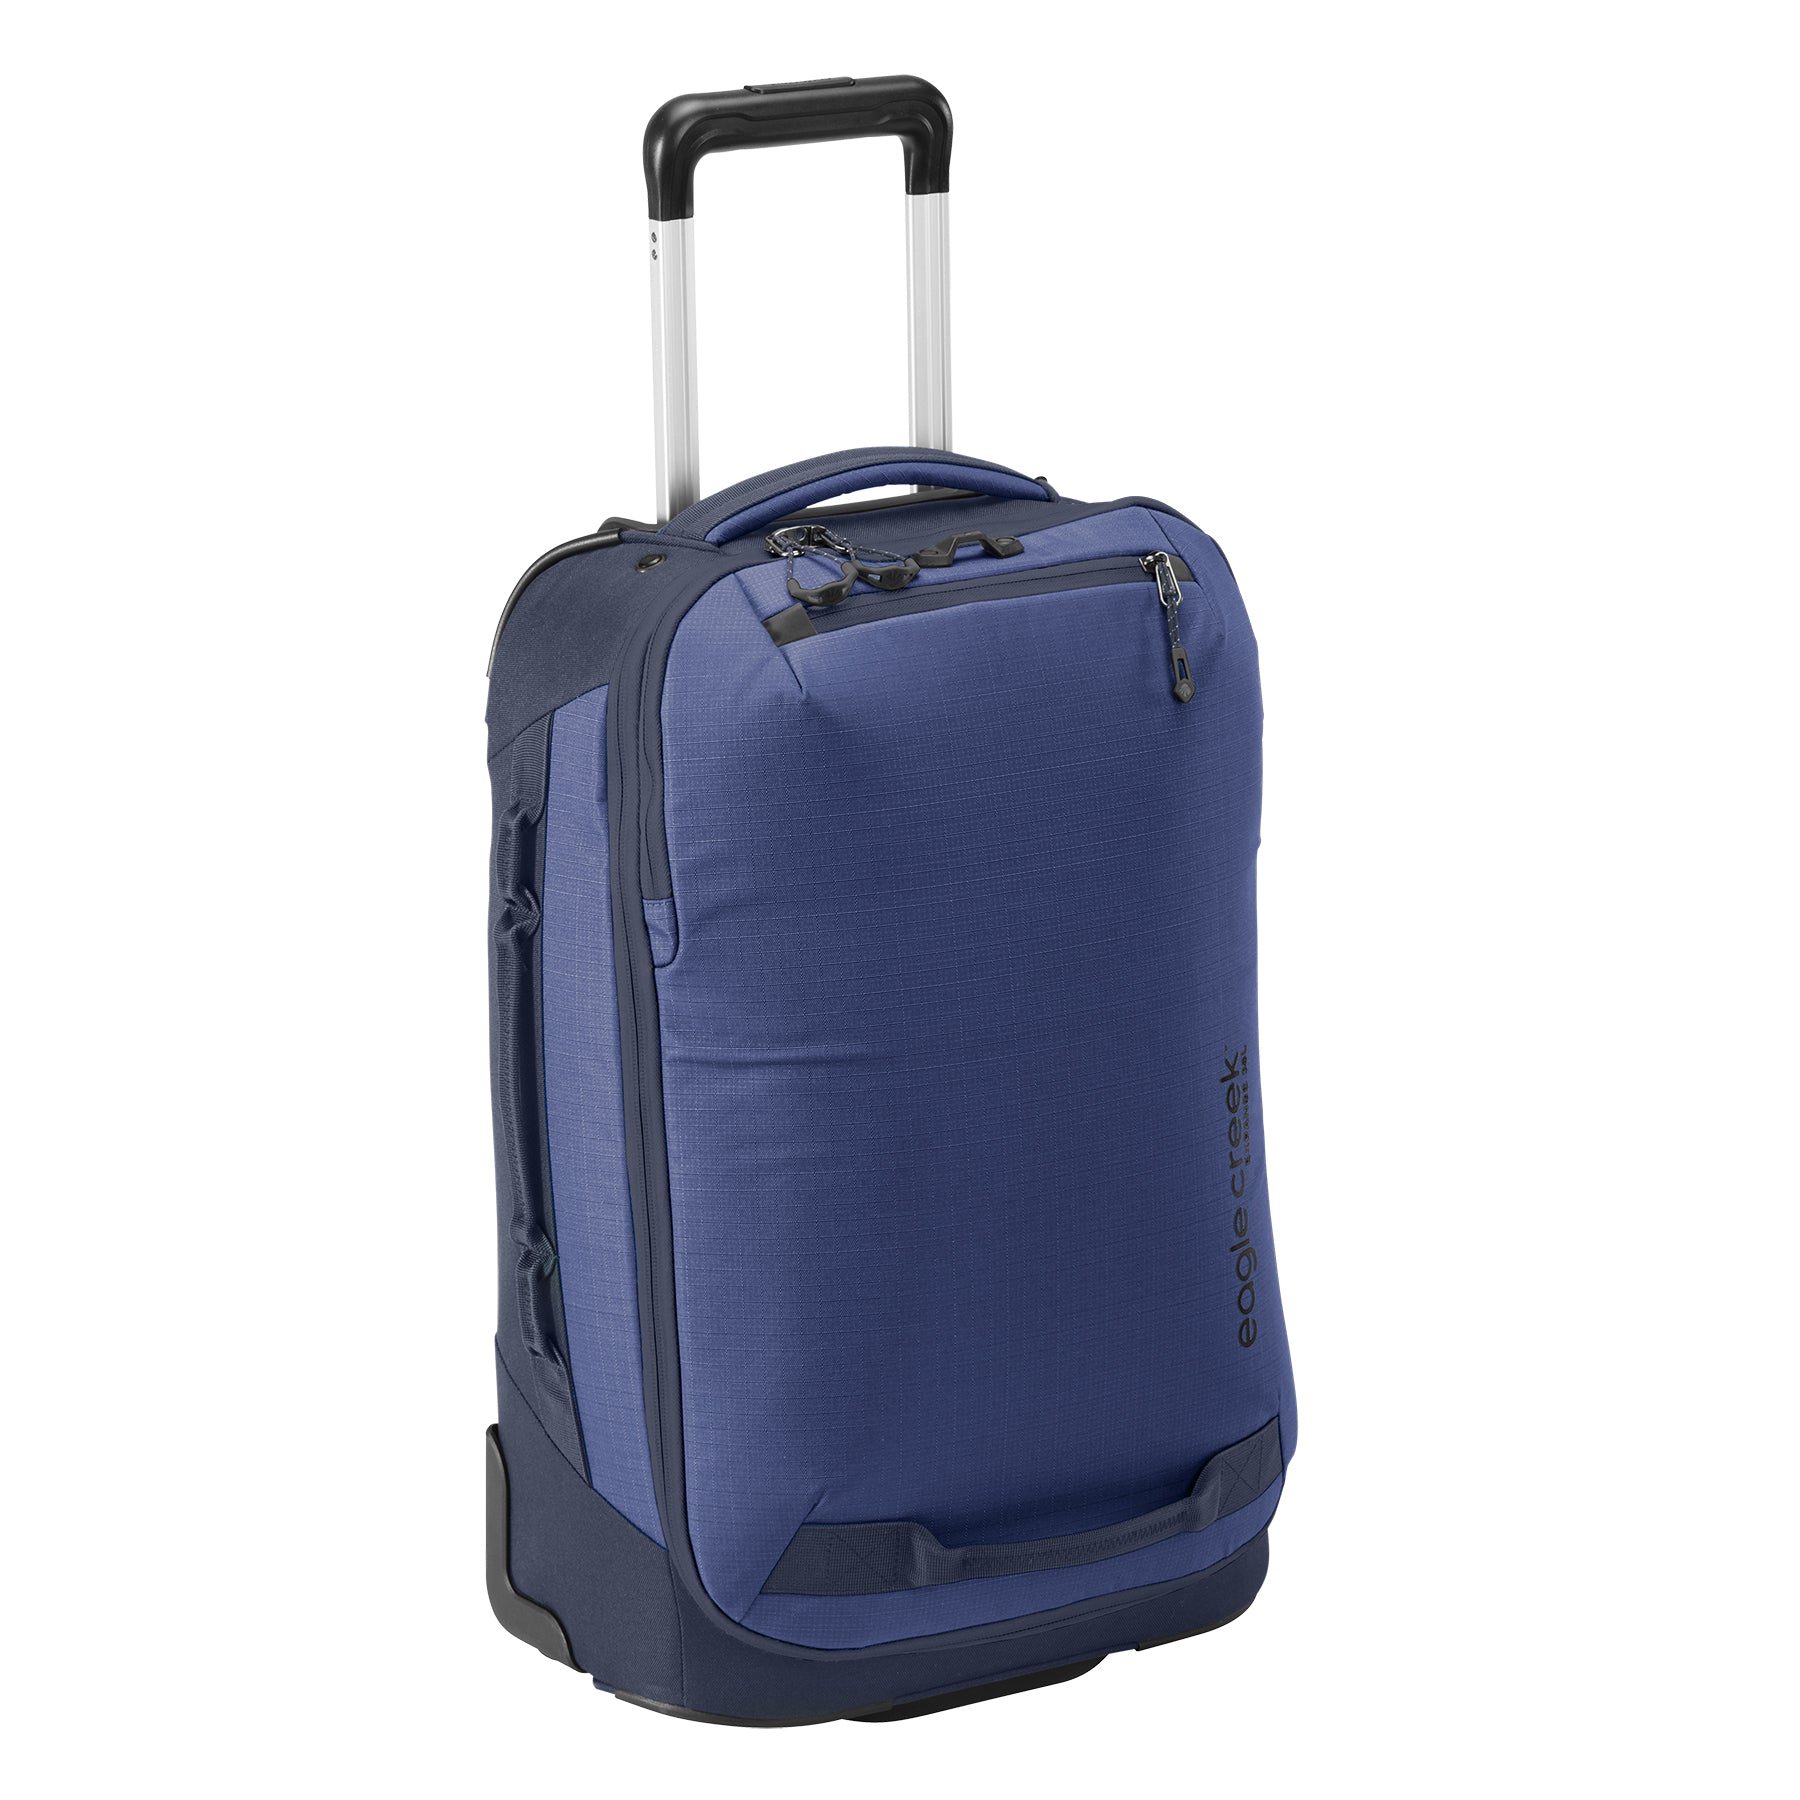 EXPANSE 2-WHEEL 21.25" CONVERTIBLE INTERNATIONAL CARRY ON LUGGAGE